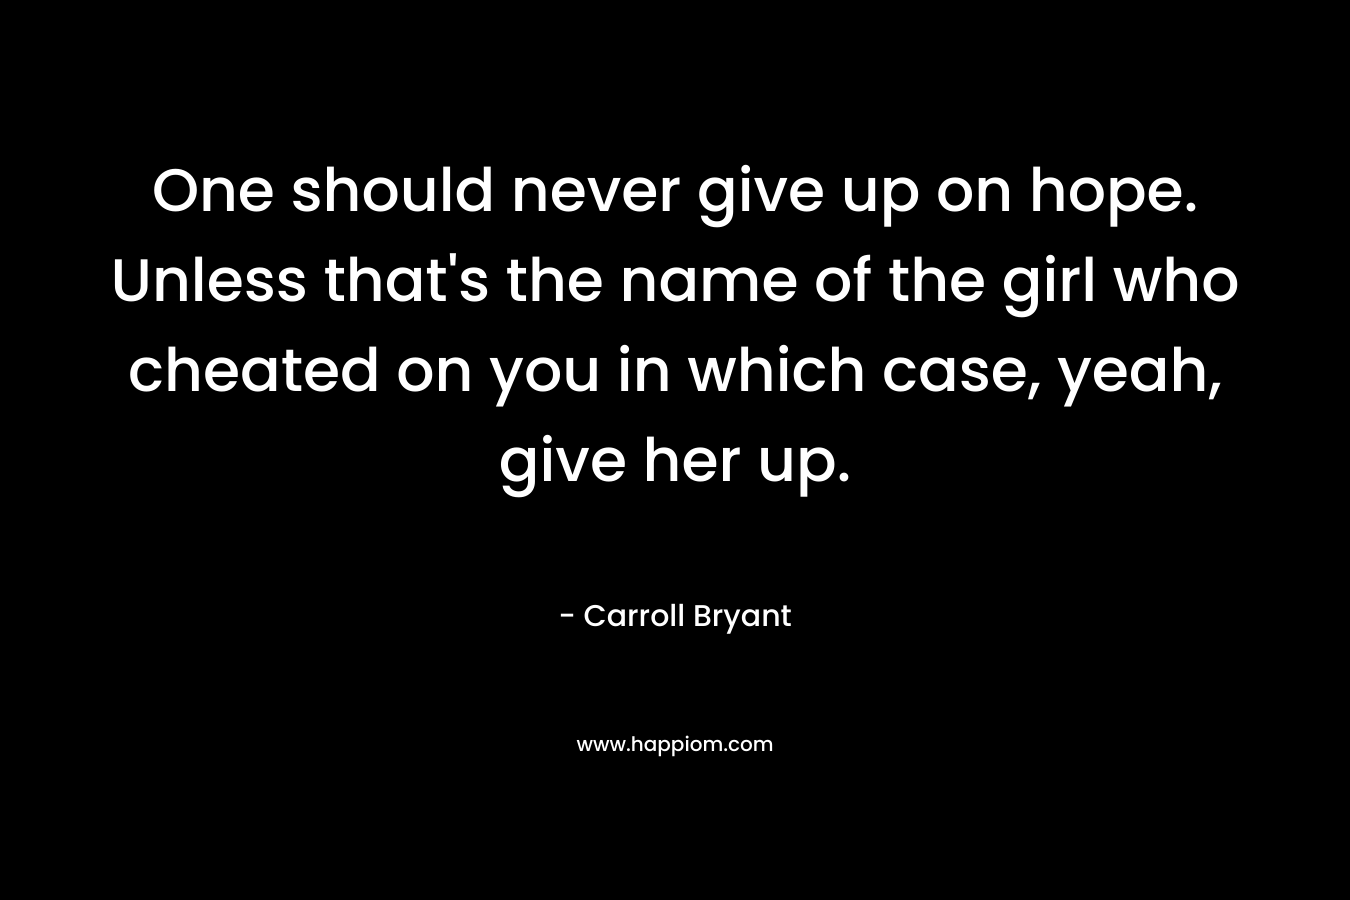 One should never give up on hope. Unless that's the name of the girl who cheated on you in which case, yeah, give her up.